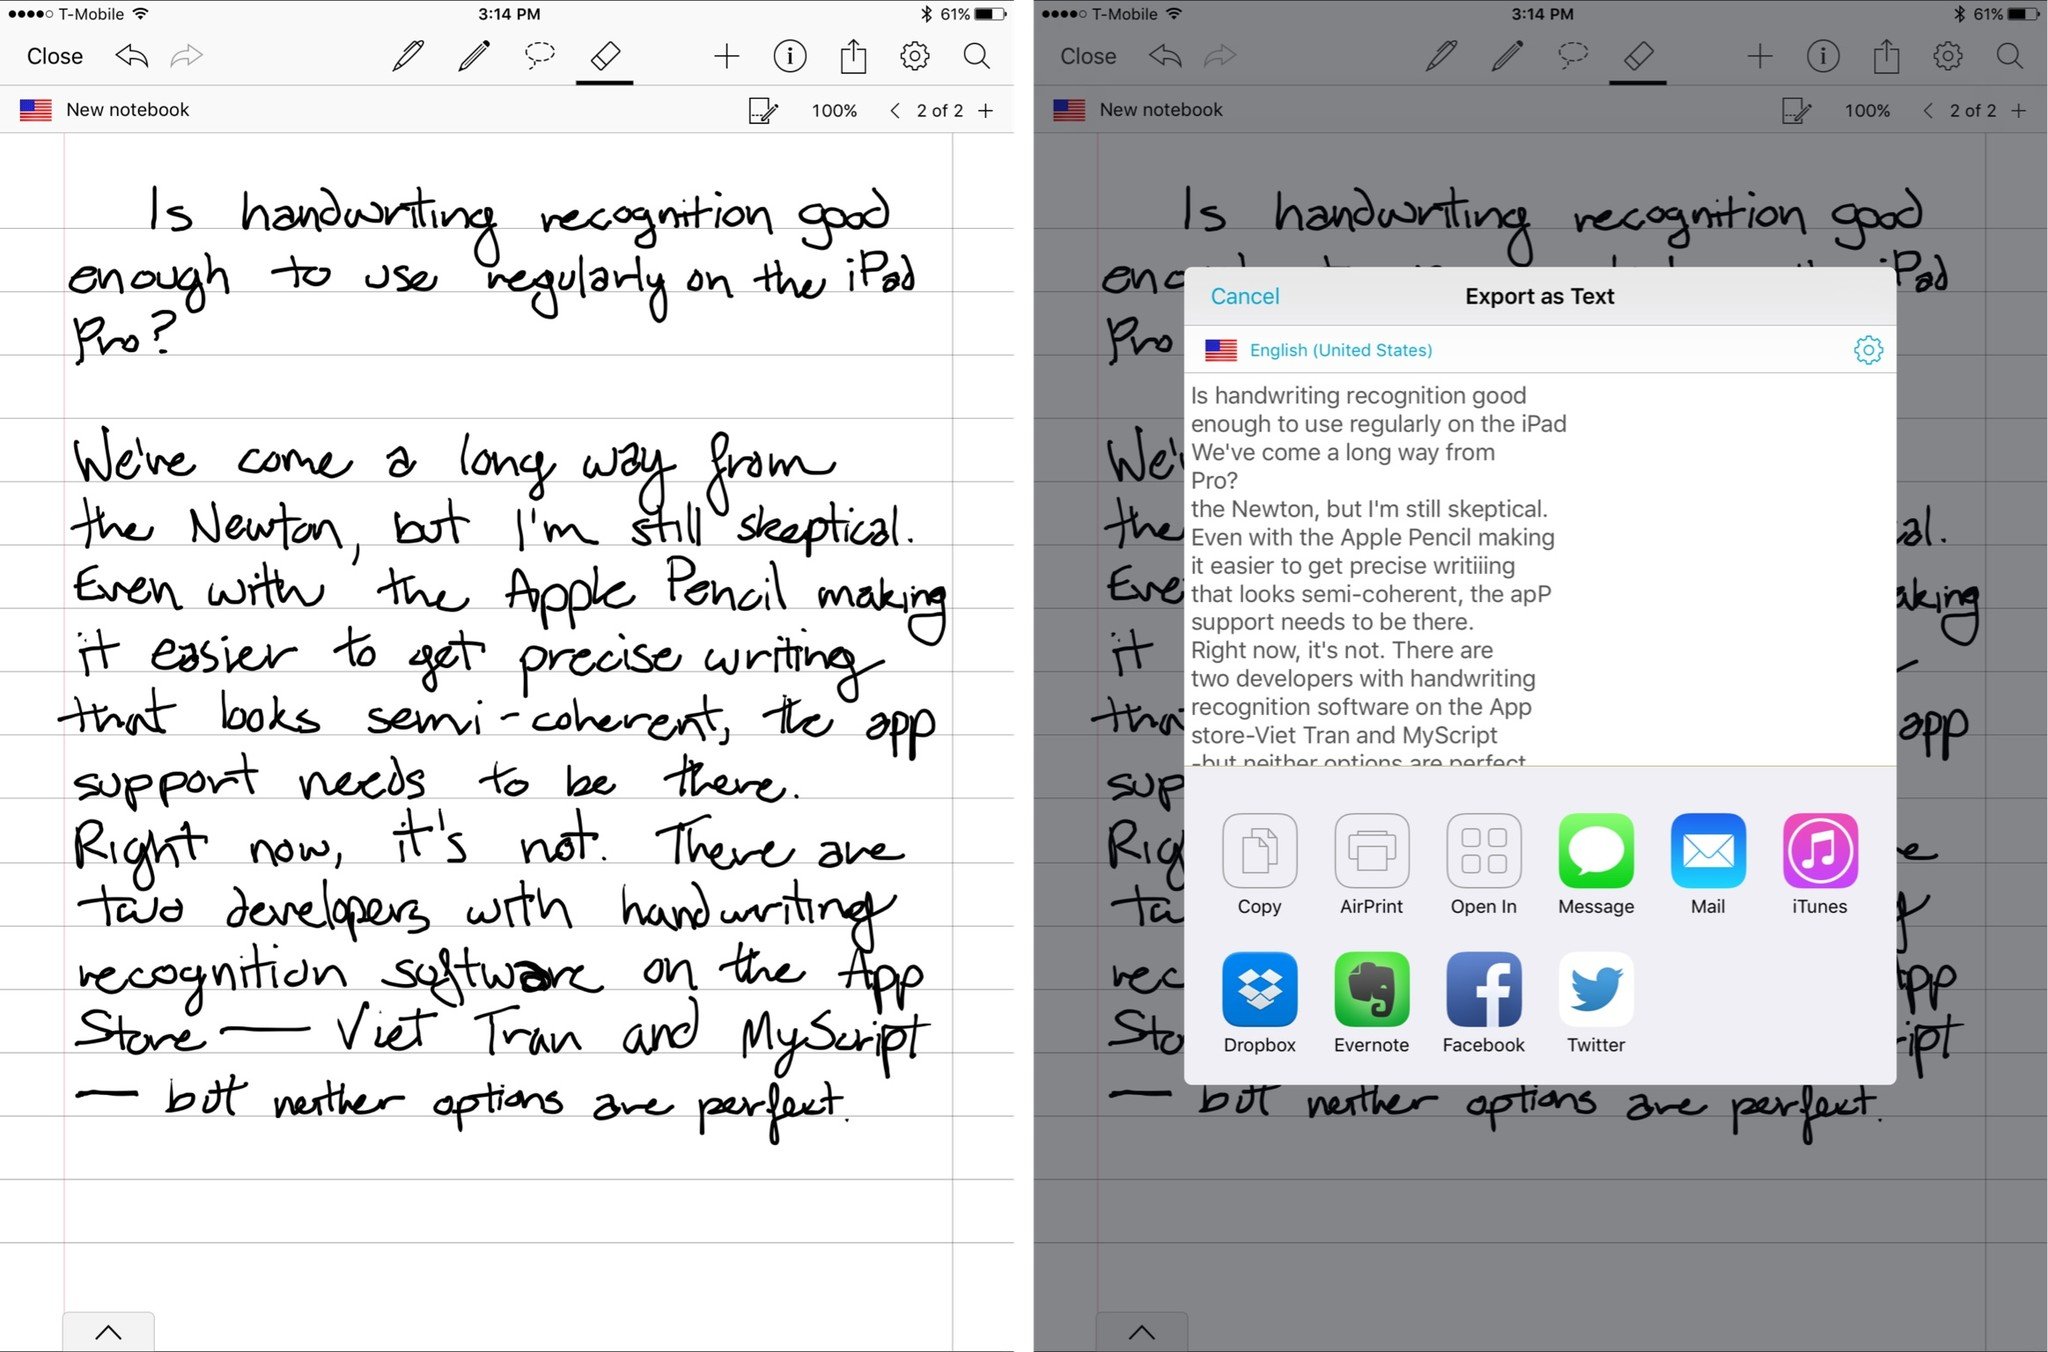 FINALLY found a free handwriting app to take notes during a business meeting!